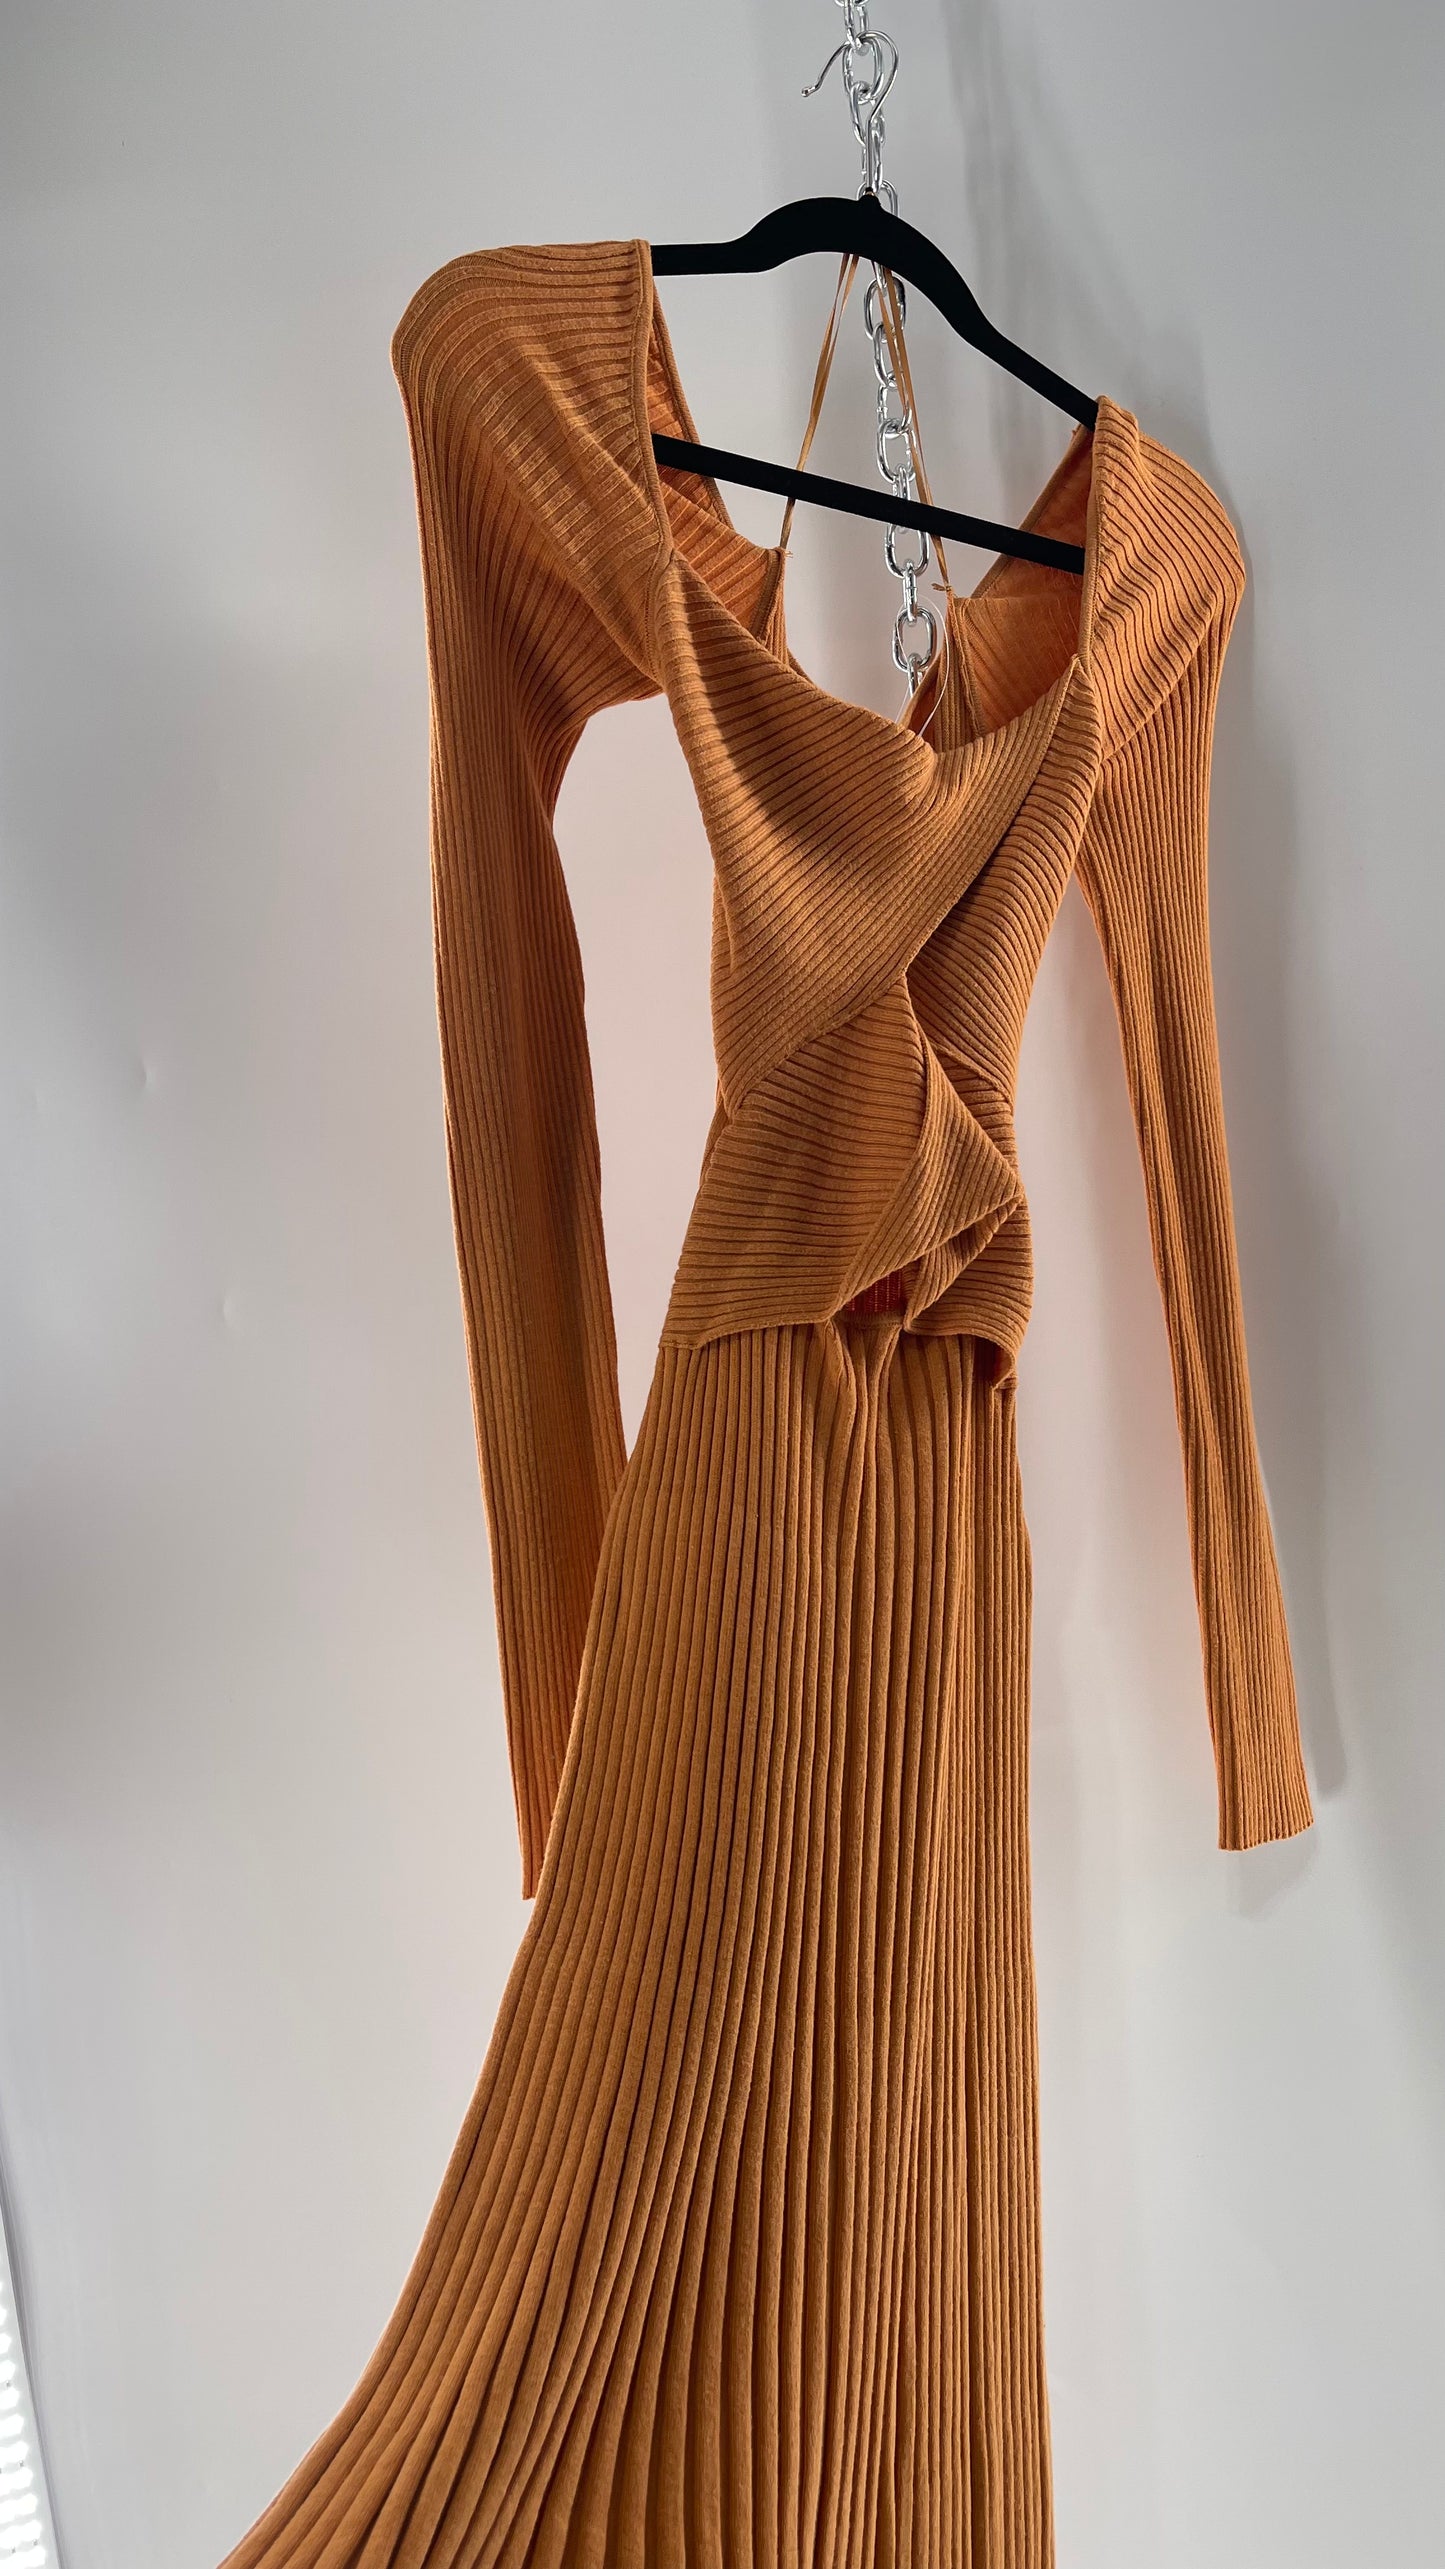 Free People Orange Ribbed Knit Maxi Dress with Cross Over Exposed Midriff Dress (Medium)